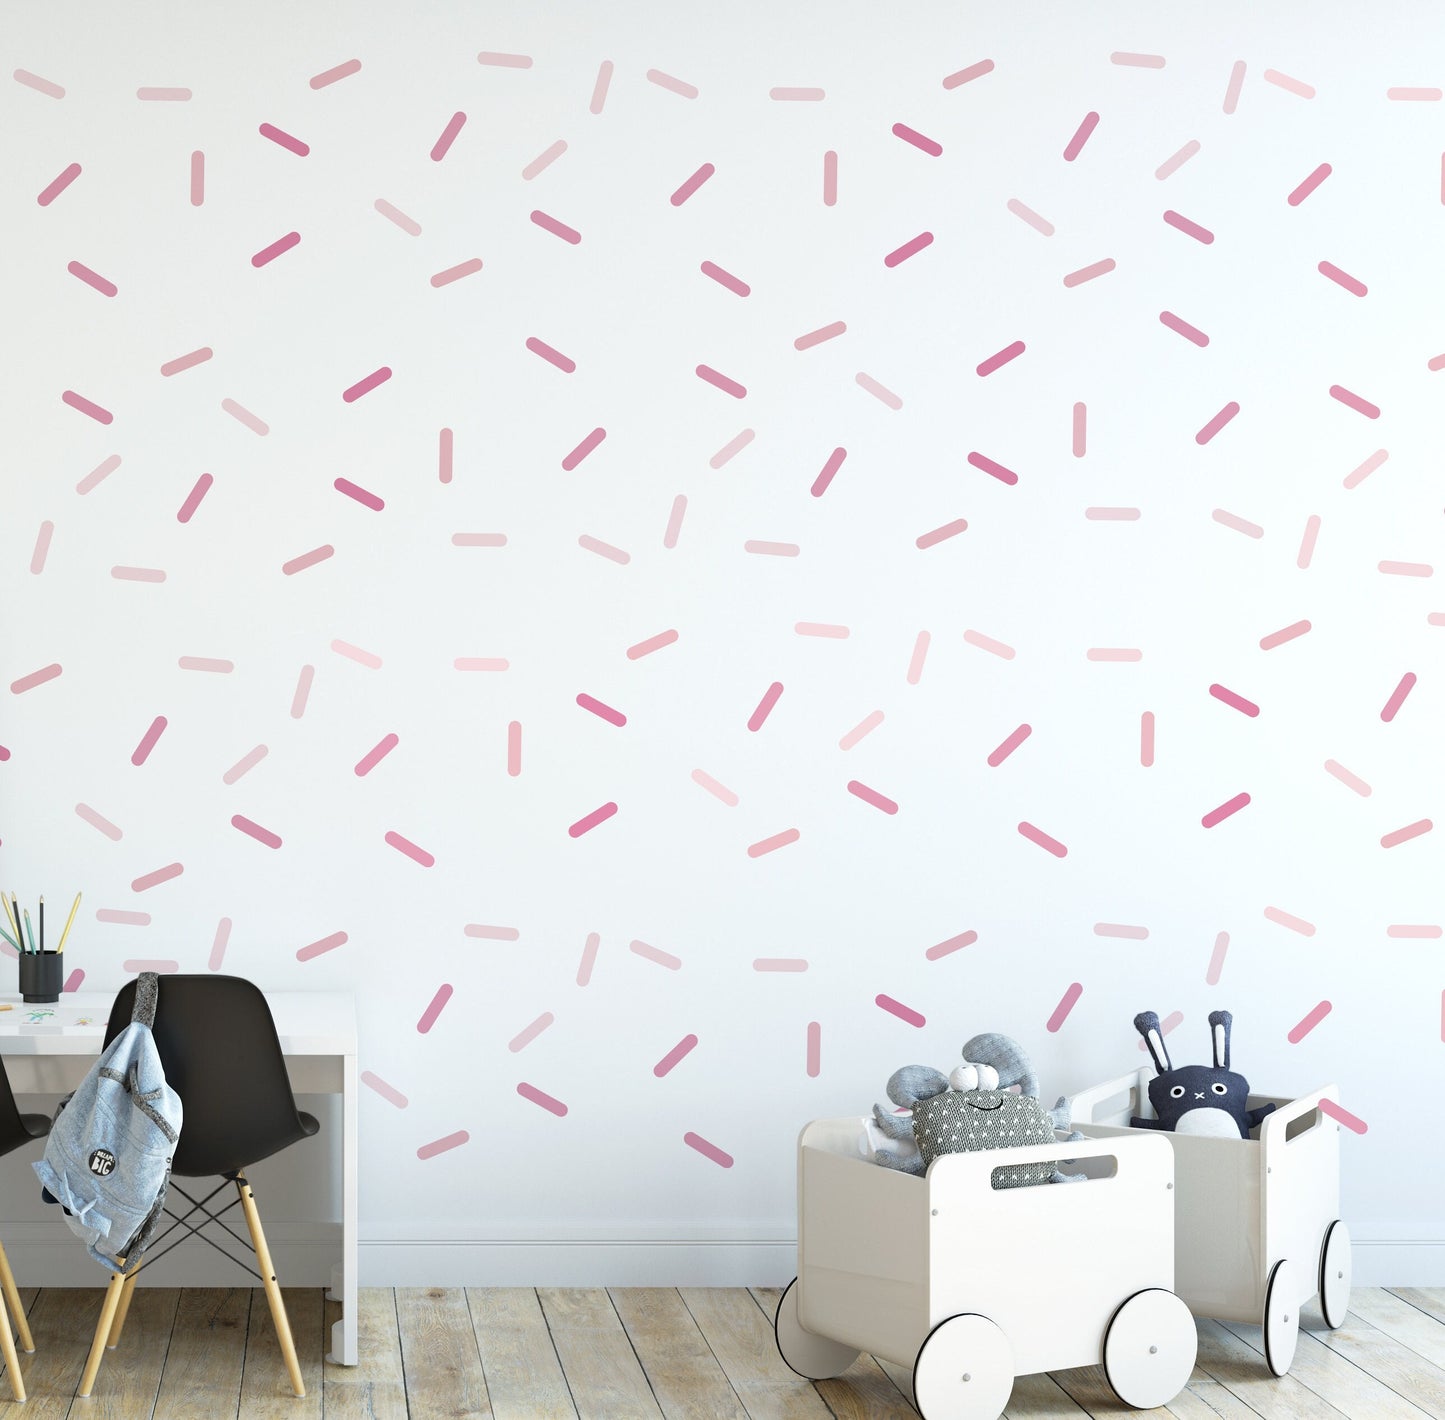 Pink Shades Sprinkle Wall Decal Stickers For Kids & Nursery Rooms